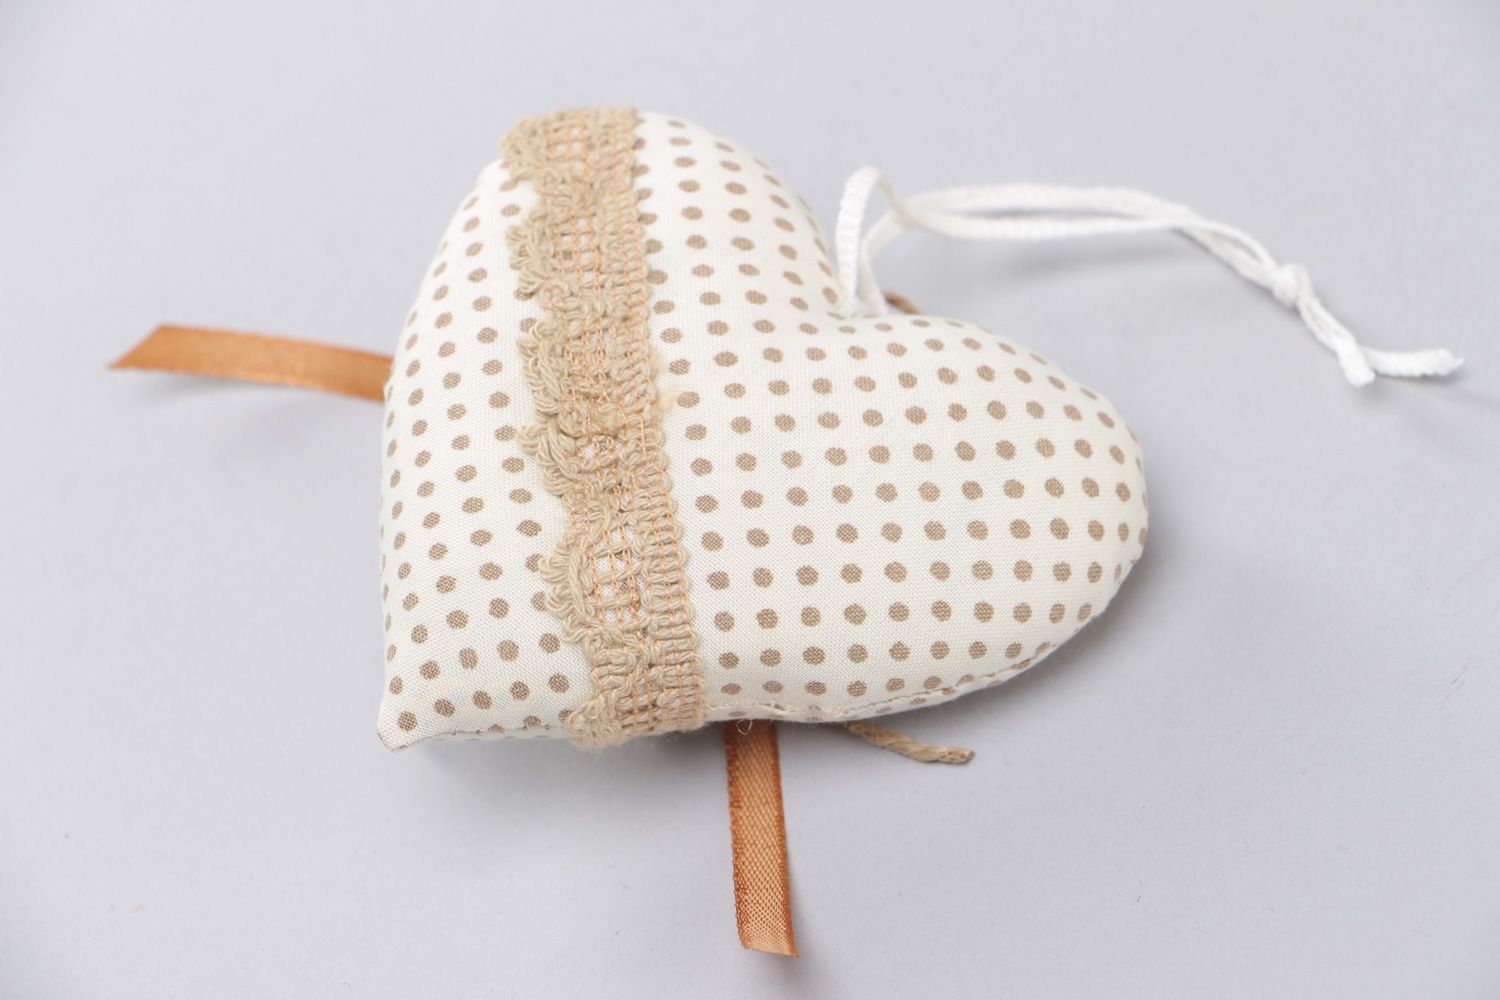 Hand sewn fabric soft heart pendant with ribbons and lace for home interior decor photo 3